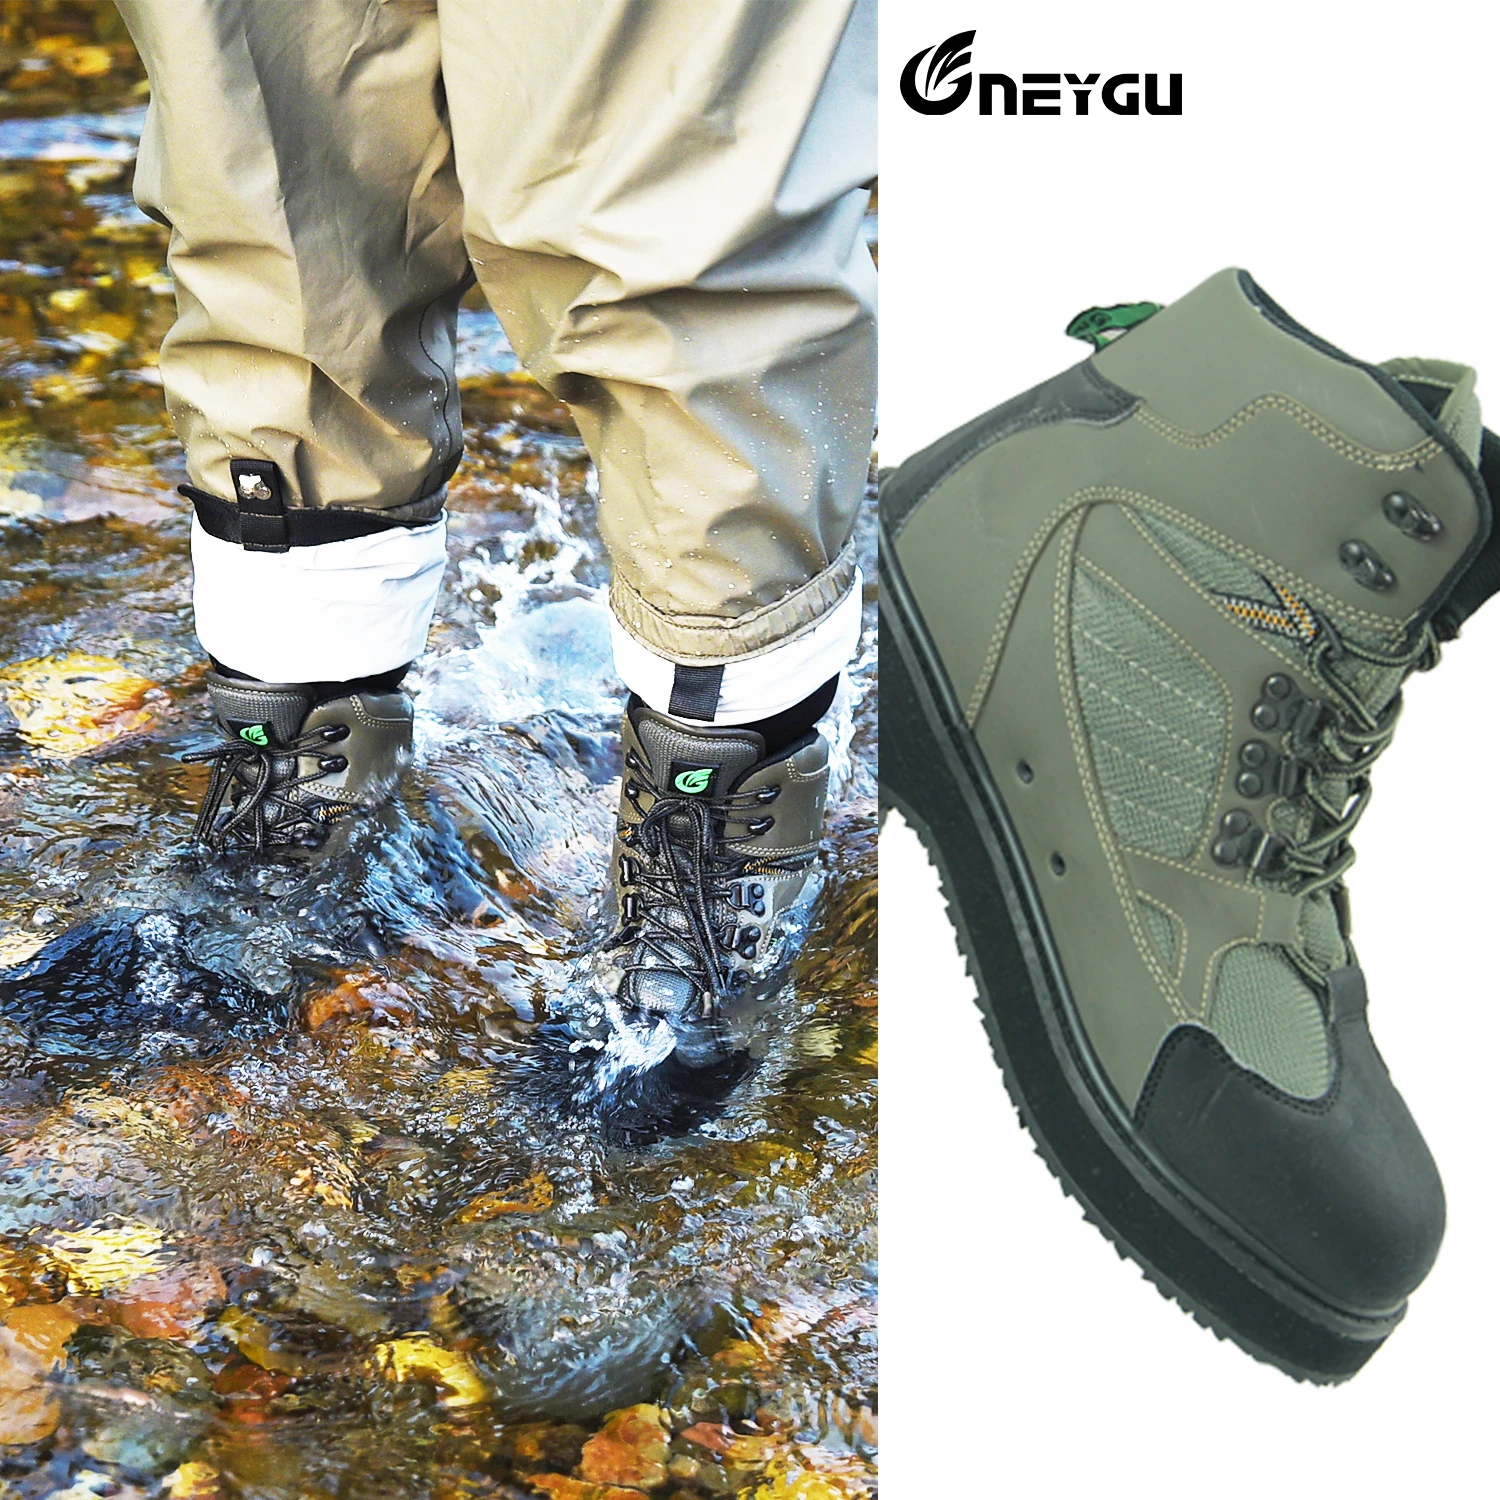 NEYGU fly fishing camo wading boots , wader shoes for hunting with felt  sole suit for outdoor sports